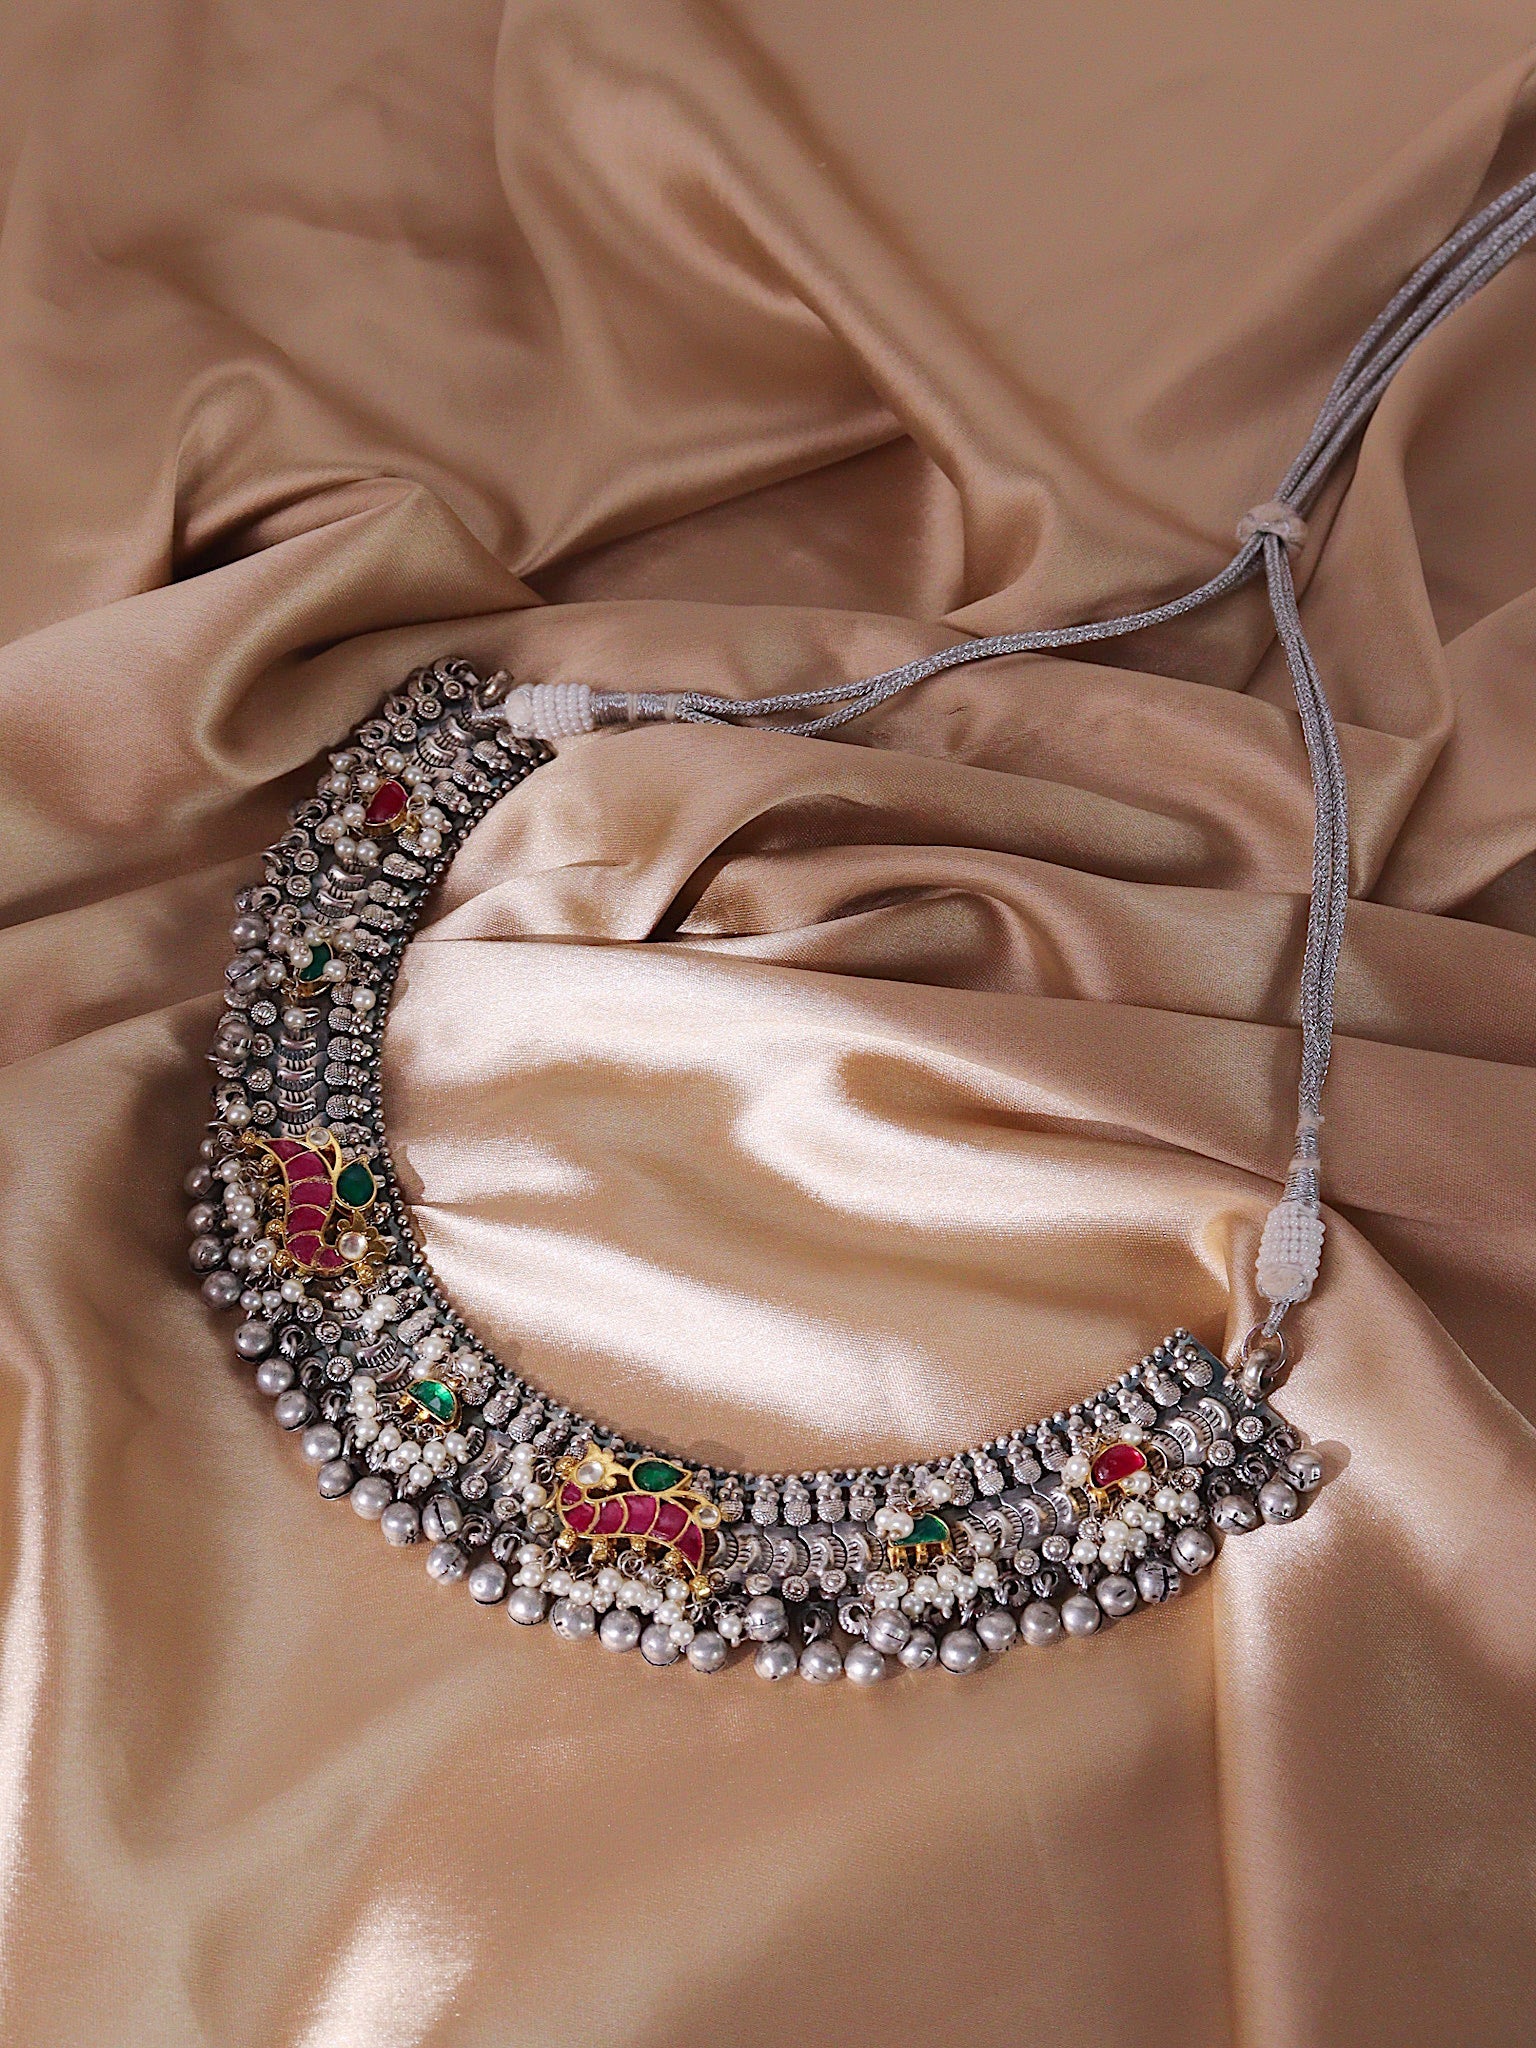 The Gypsy Ghungroo Glare Necklace 